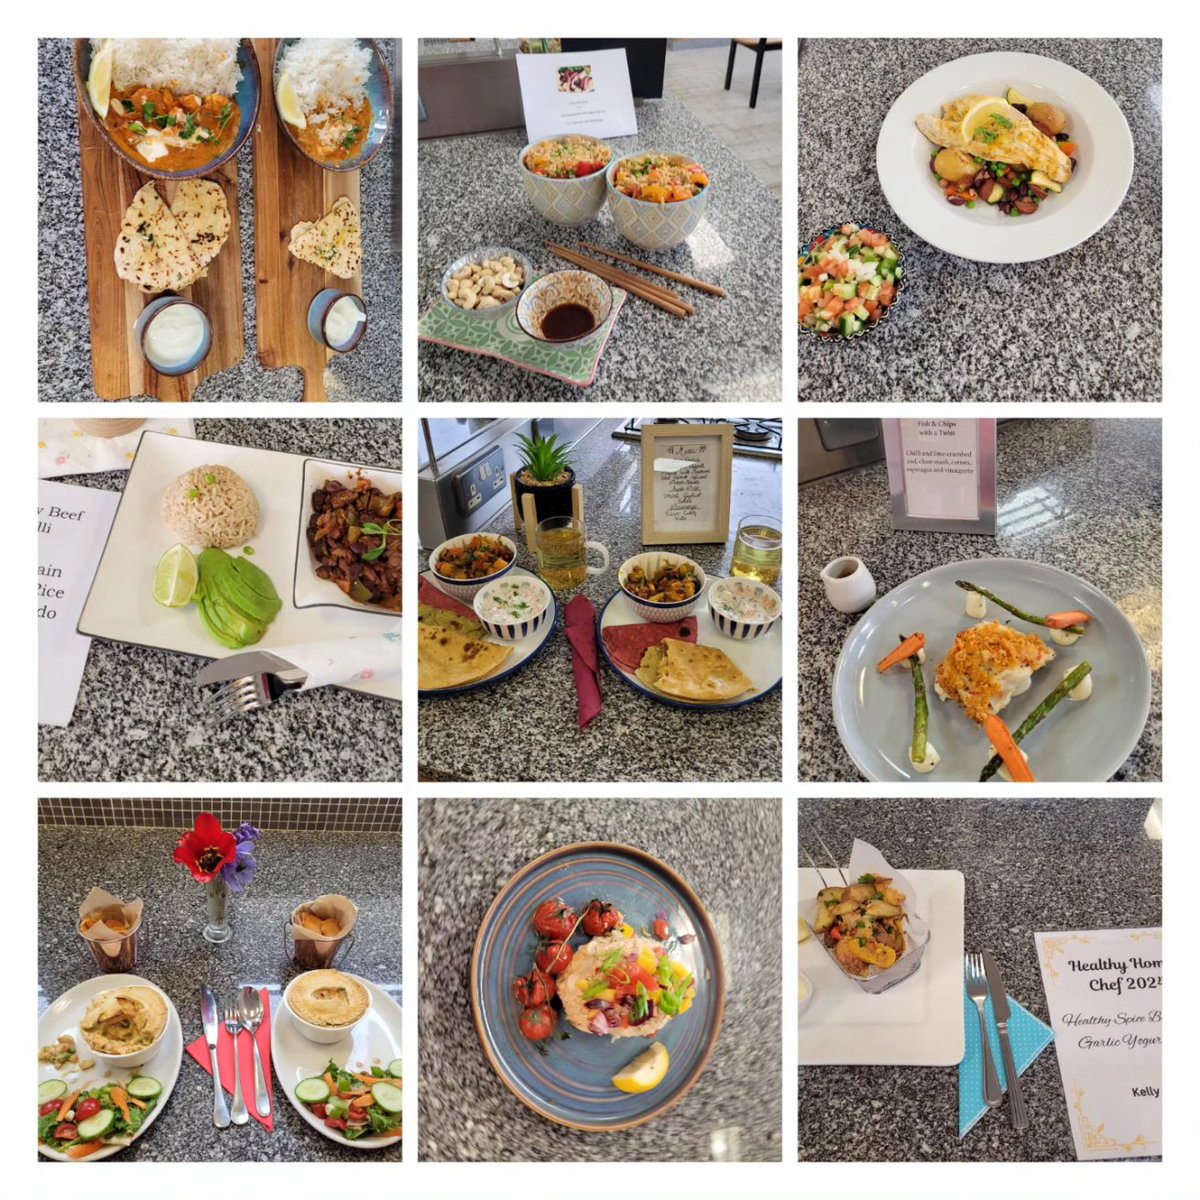 Exceptional standard and super dishes at the Healthy Home Chef Junior final held today in ATU St Angelas @ATUStAngelas @drelainemooney @nevenmaguire